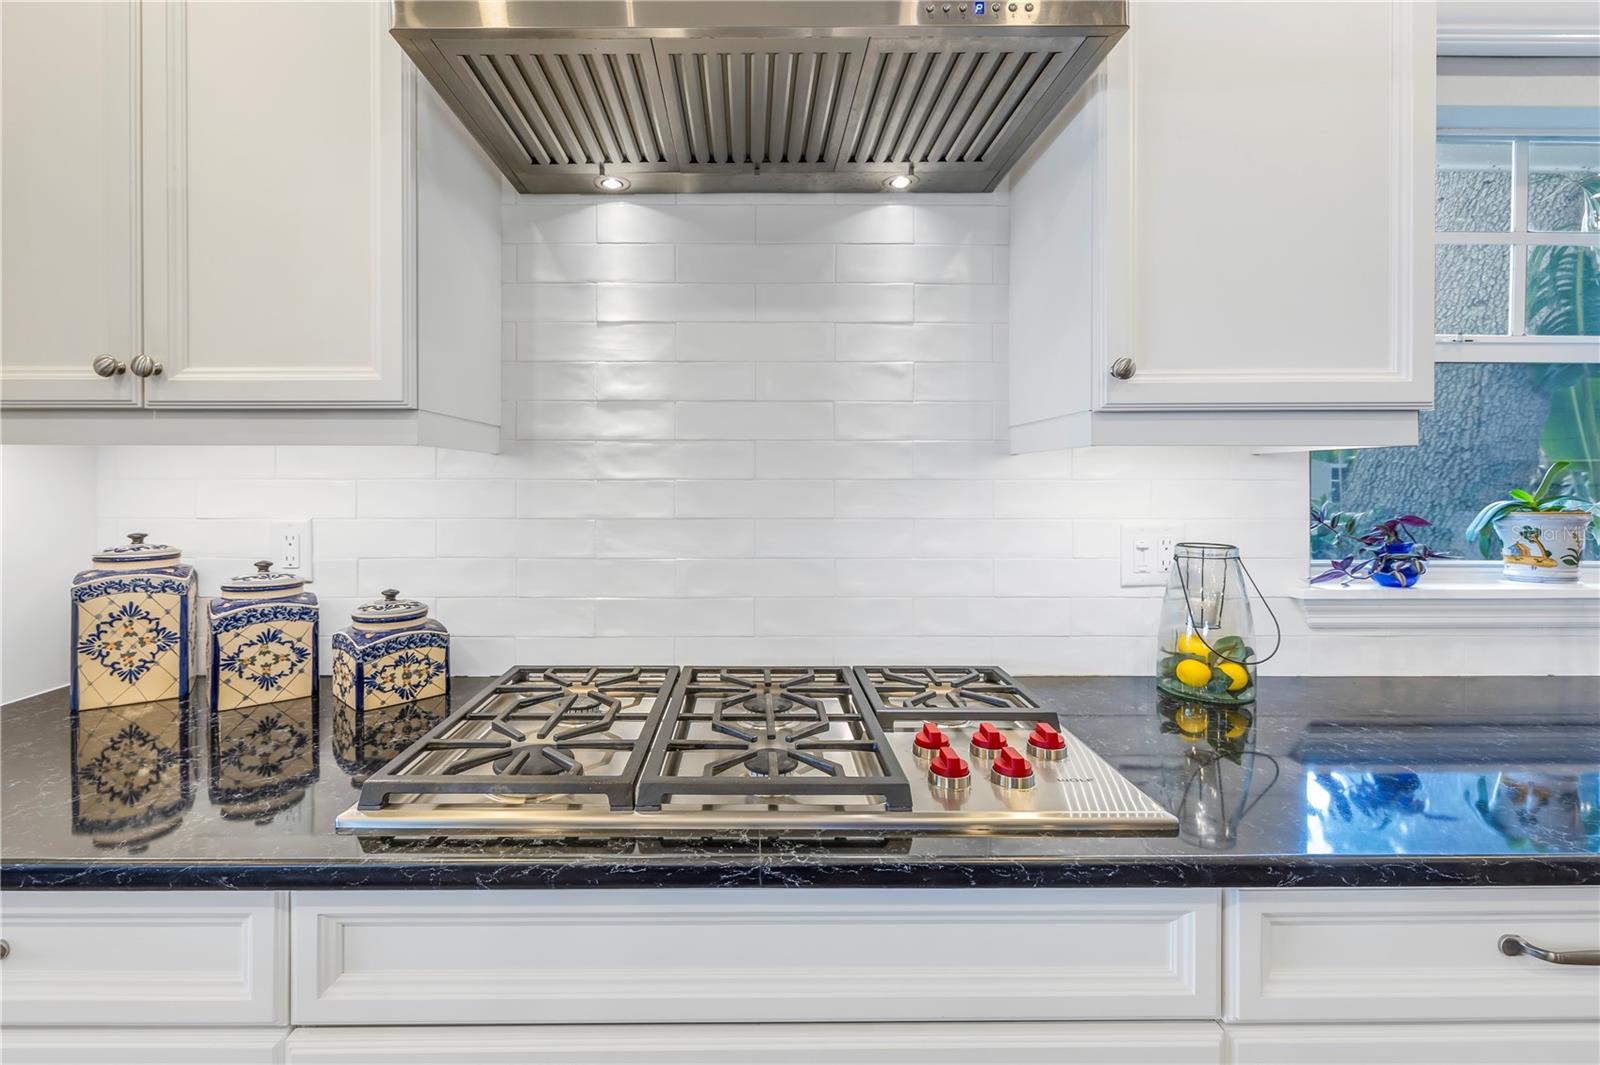 Who doesn't love a gas range cooktop? Natural gas is available in the alley. Perfect for a generator. Tankless water heater is also gas.